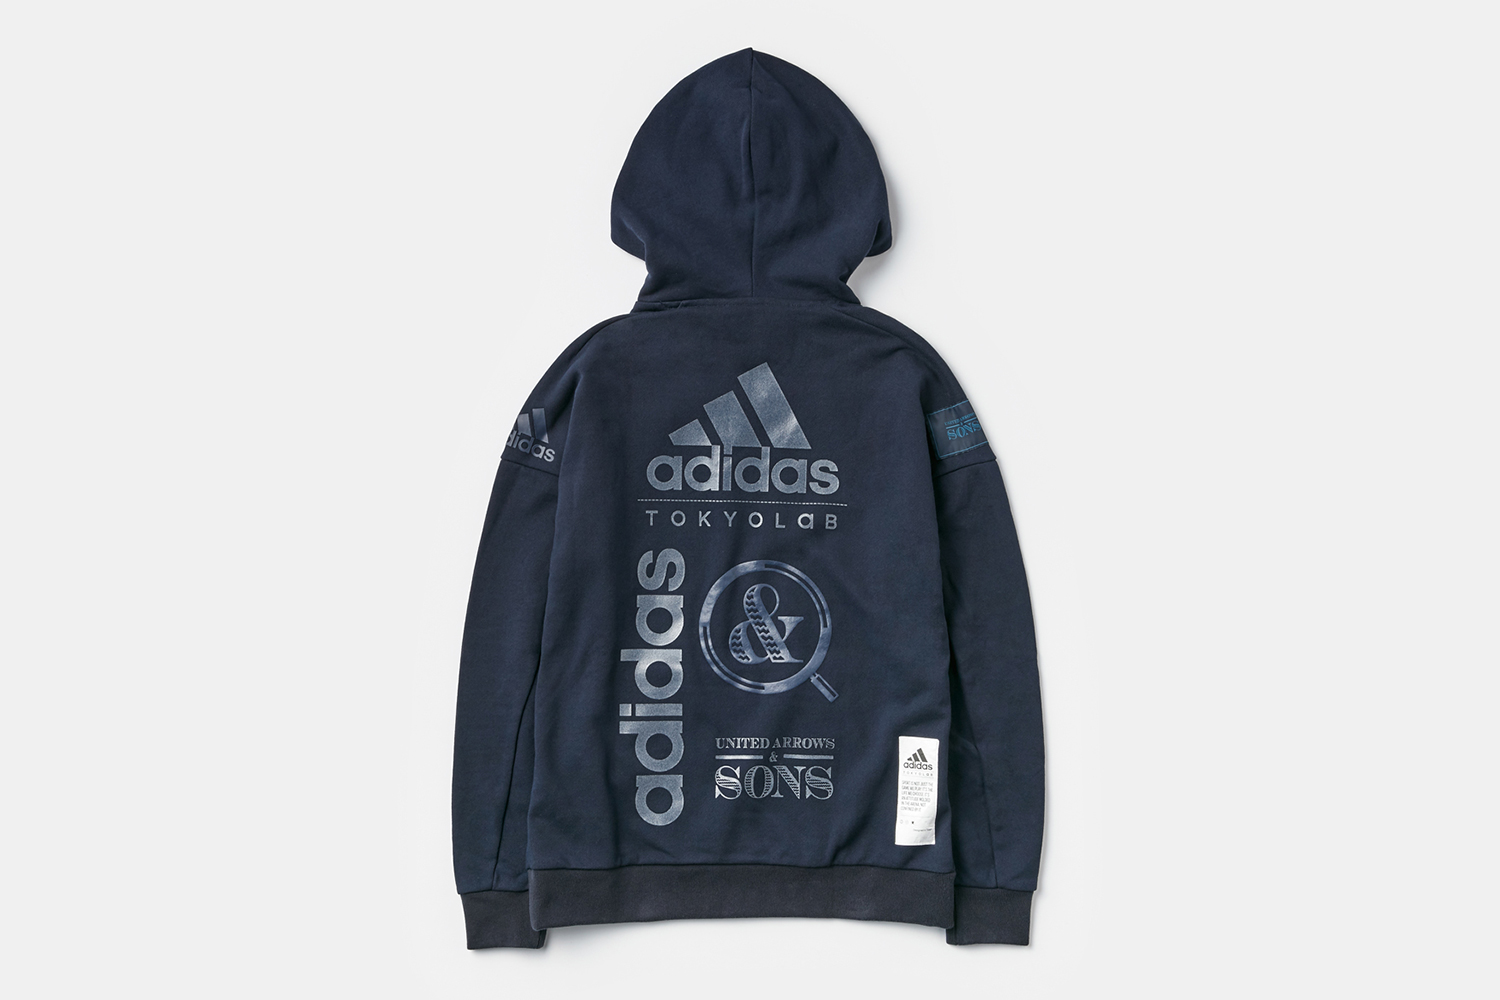 united-arrows-sons-adidas-icon-collection-08